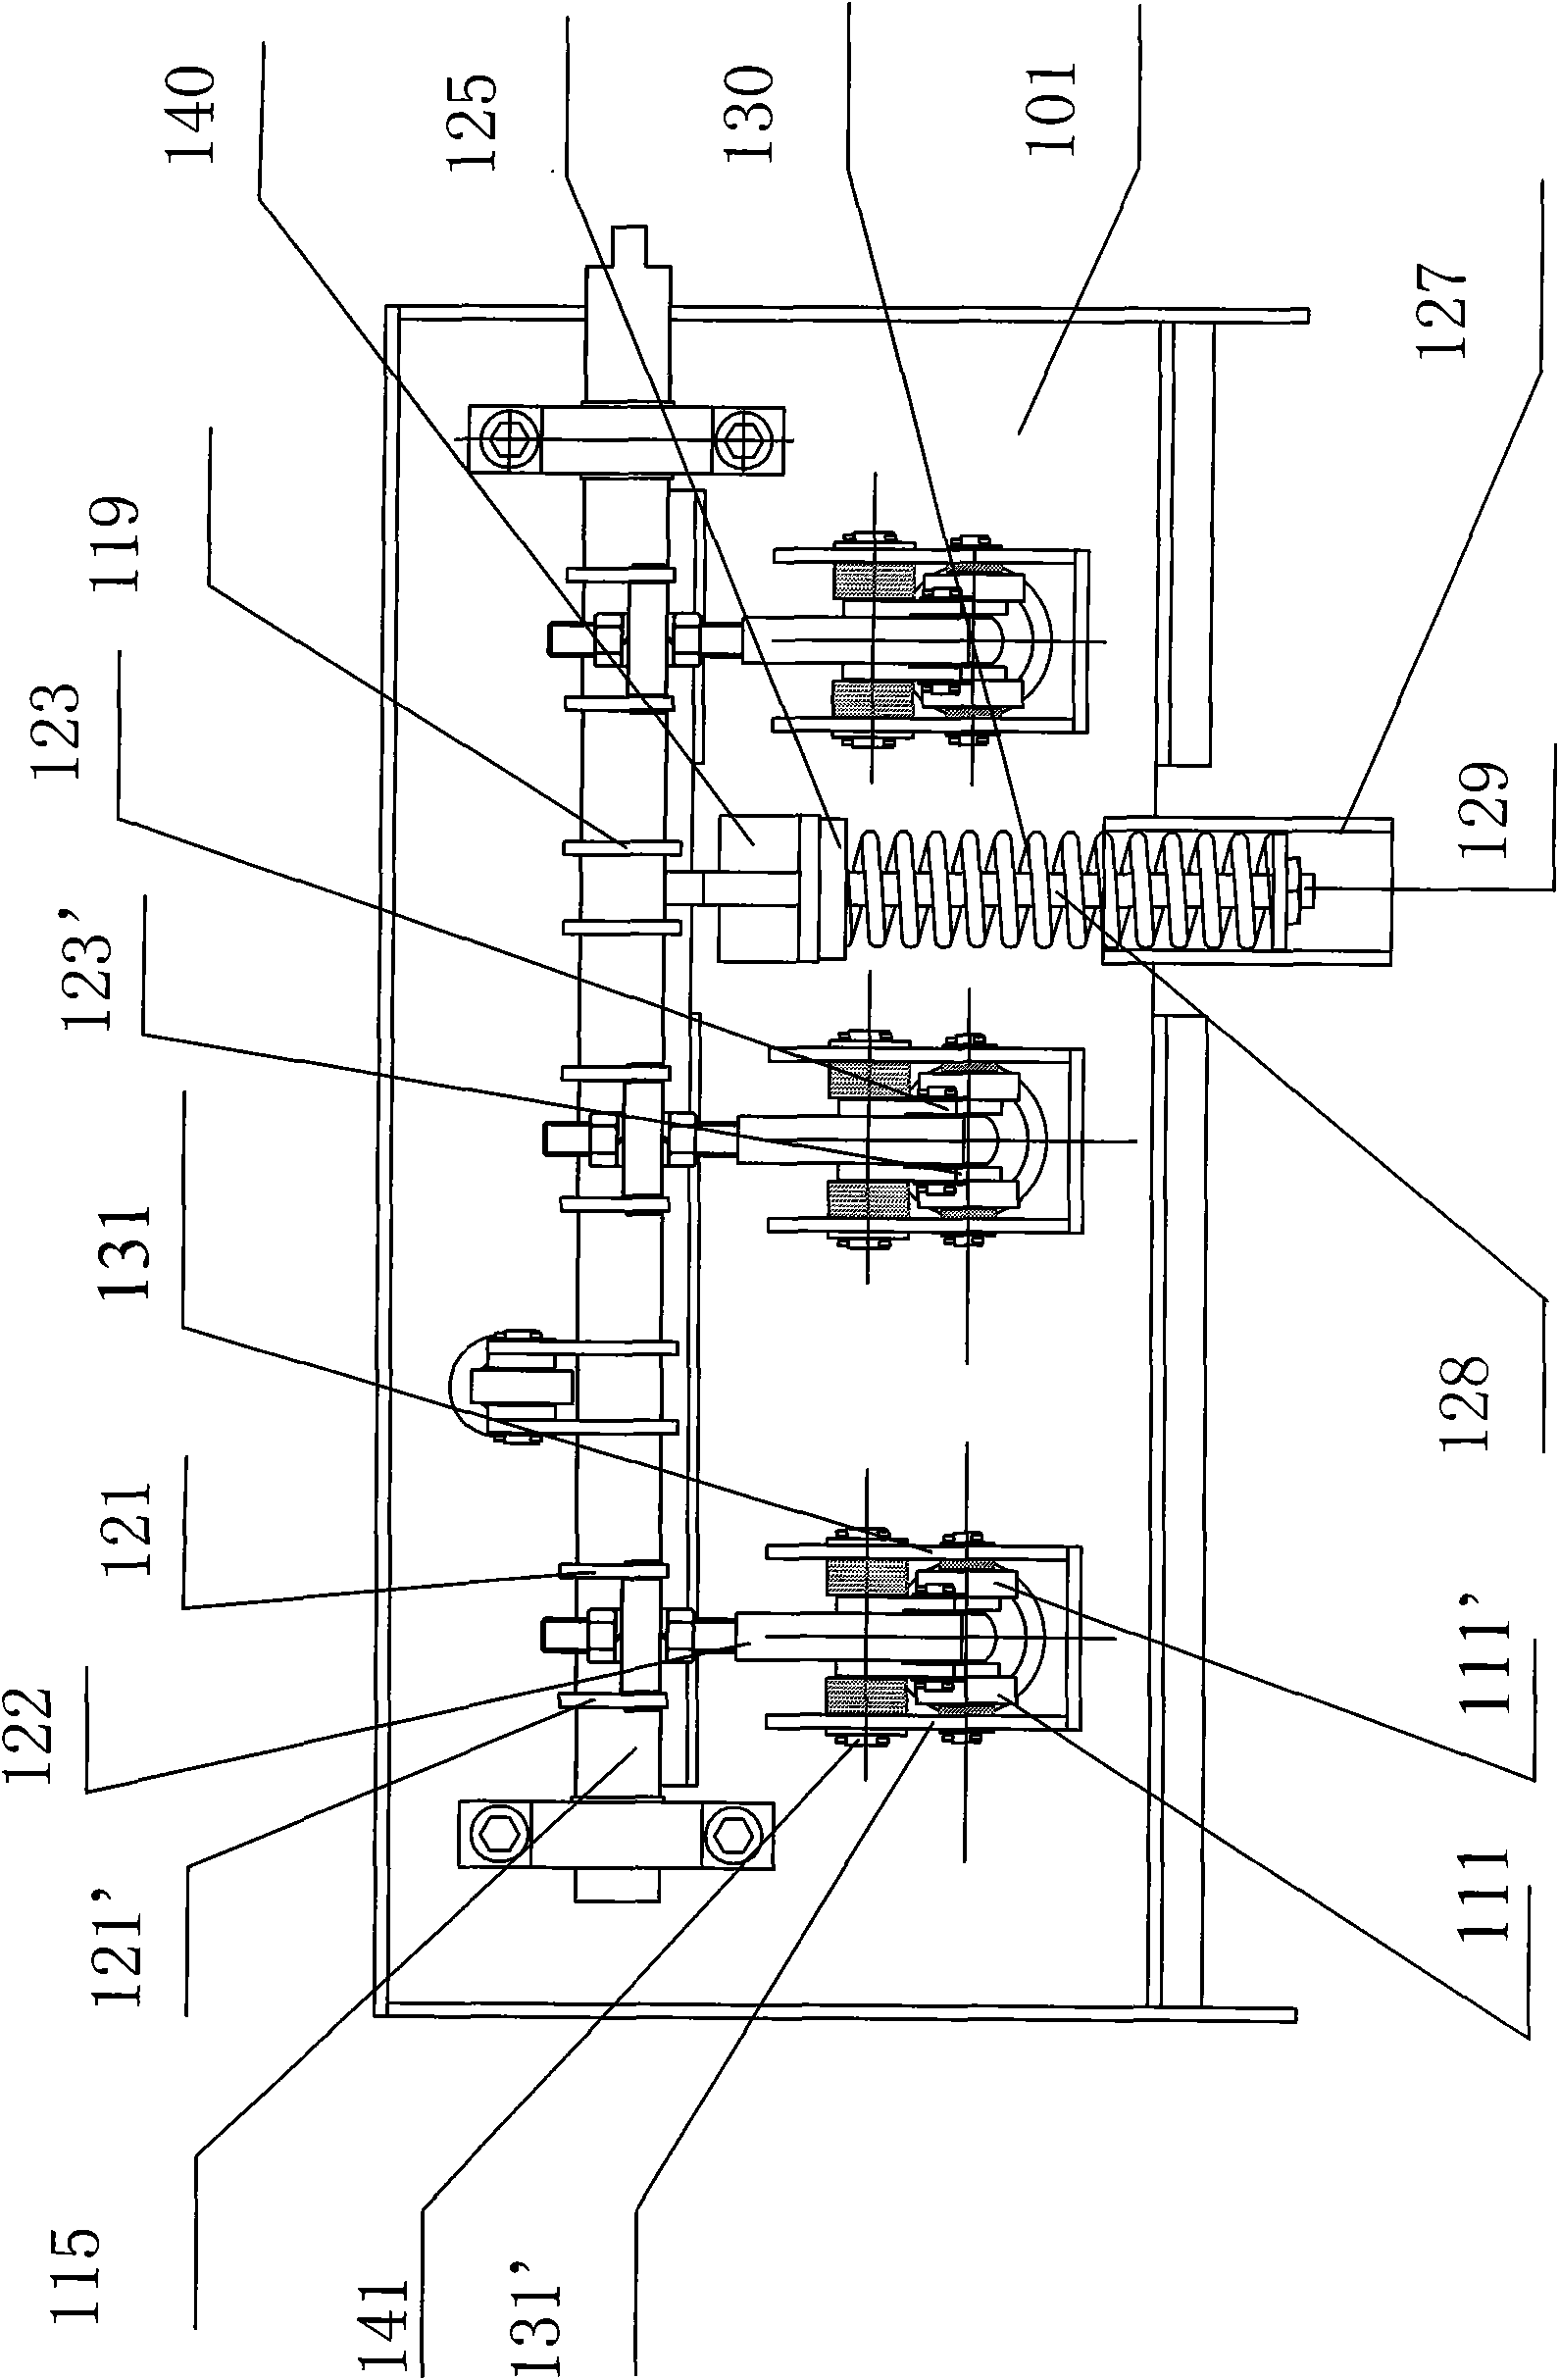 Electric switch provided with separate arc-extinguishing device